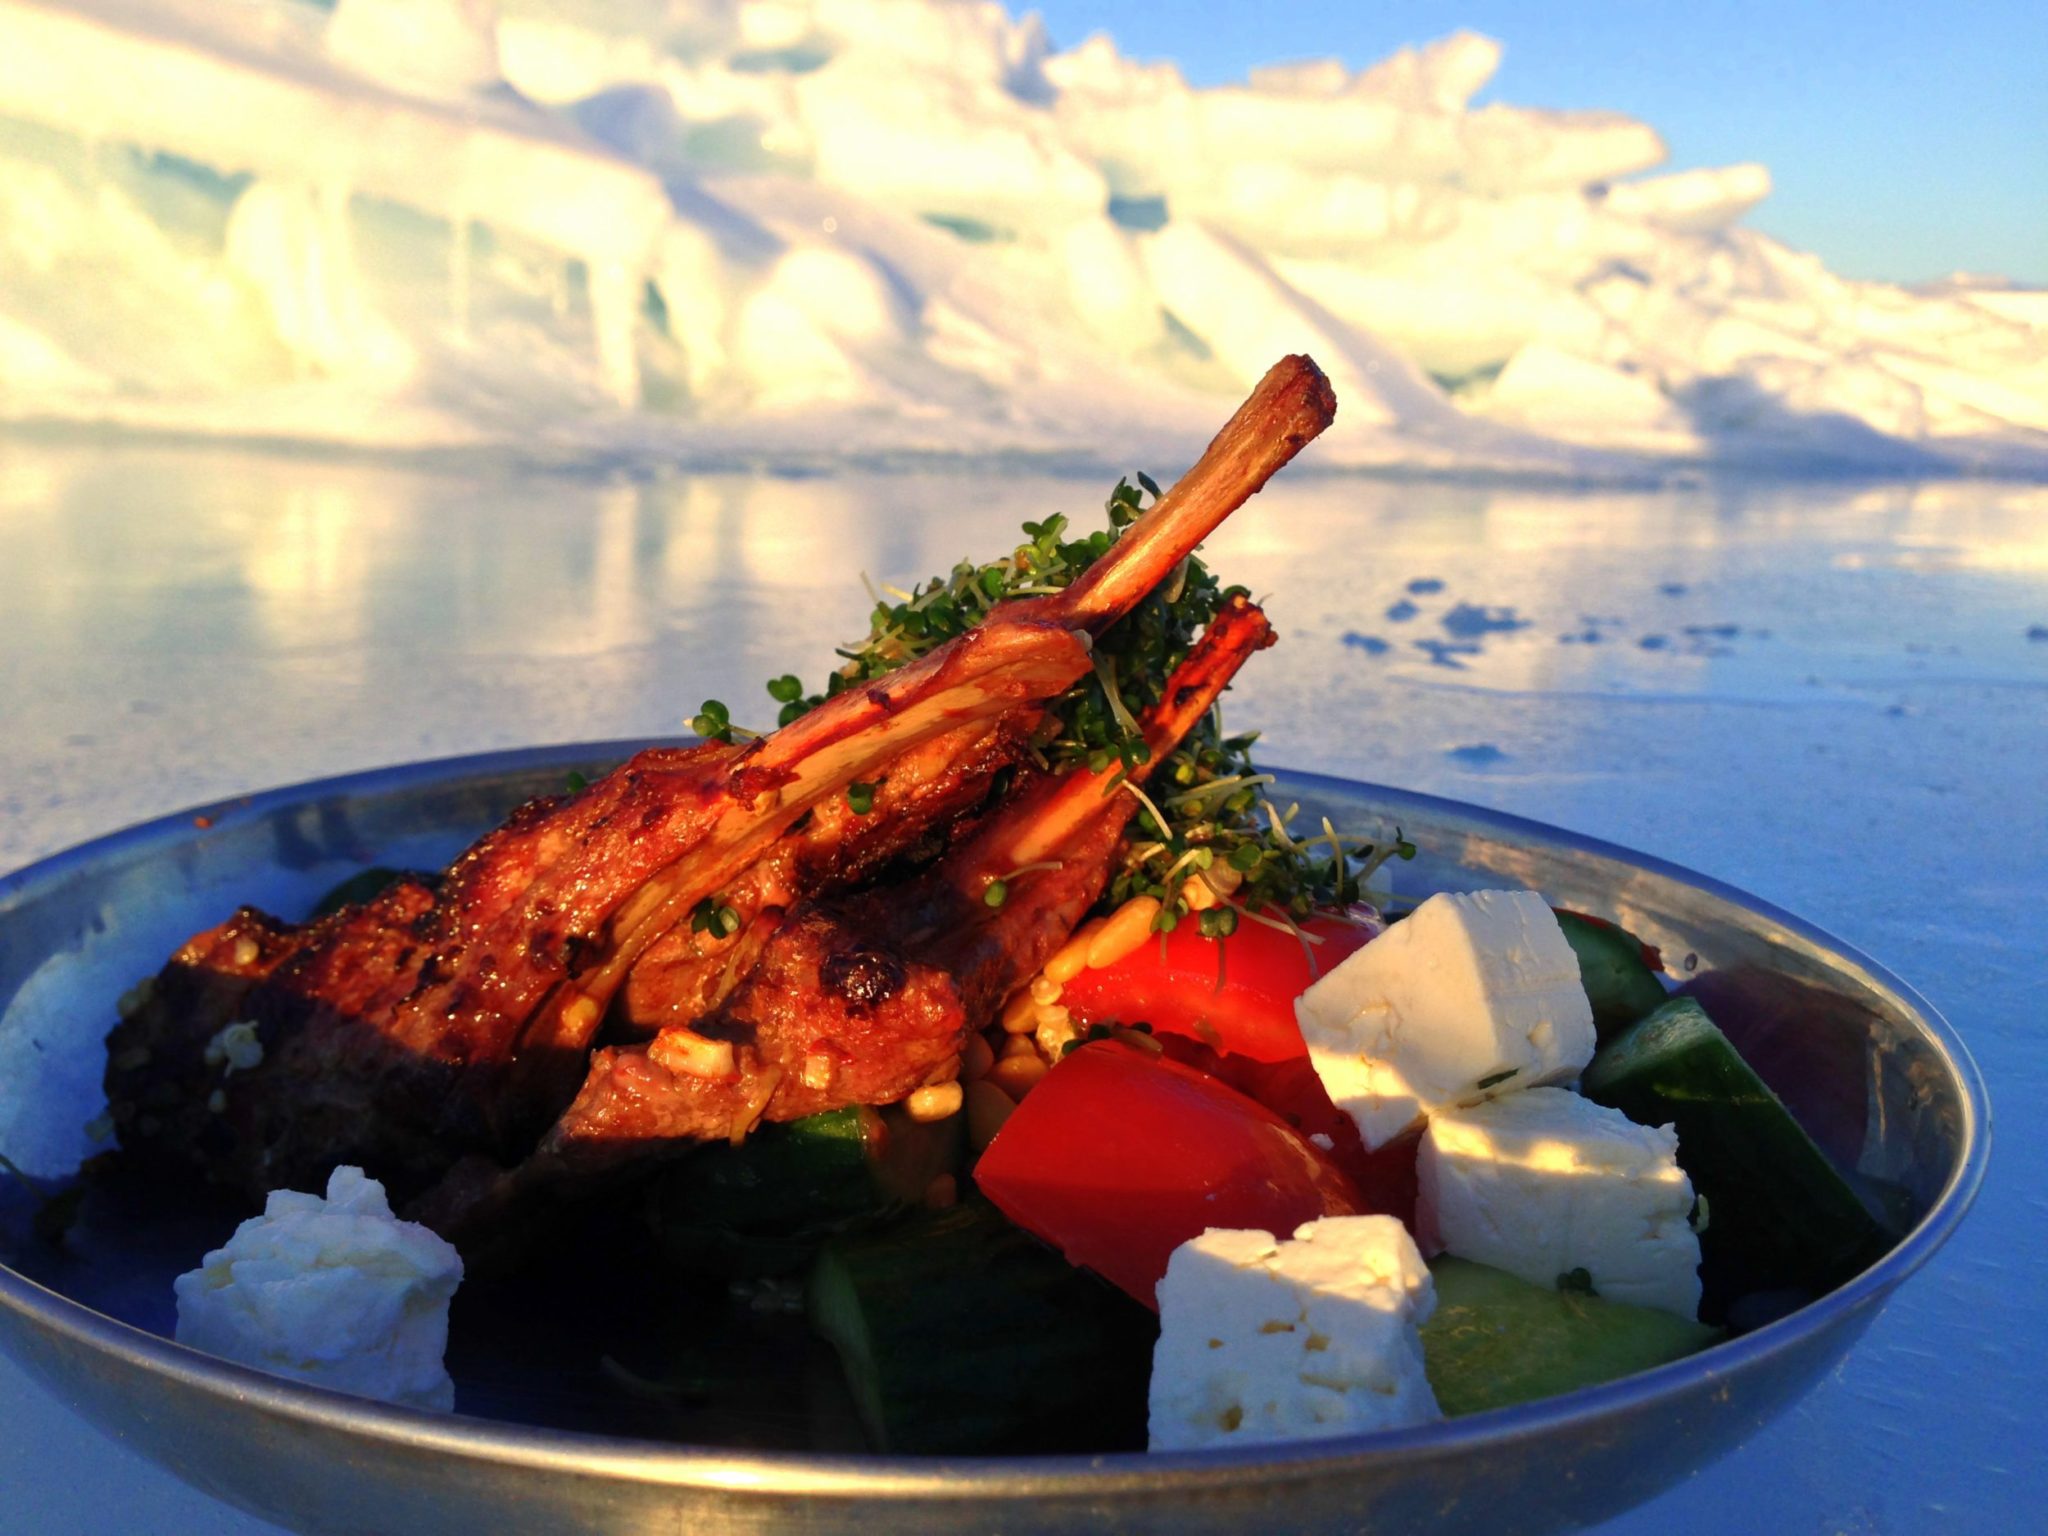 “Arctic Delights: Nutrient-Rich Seafood, Game Meat, and Berries Await in the Icy Wilderness”